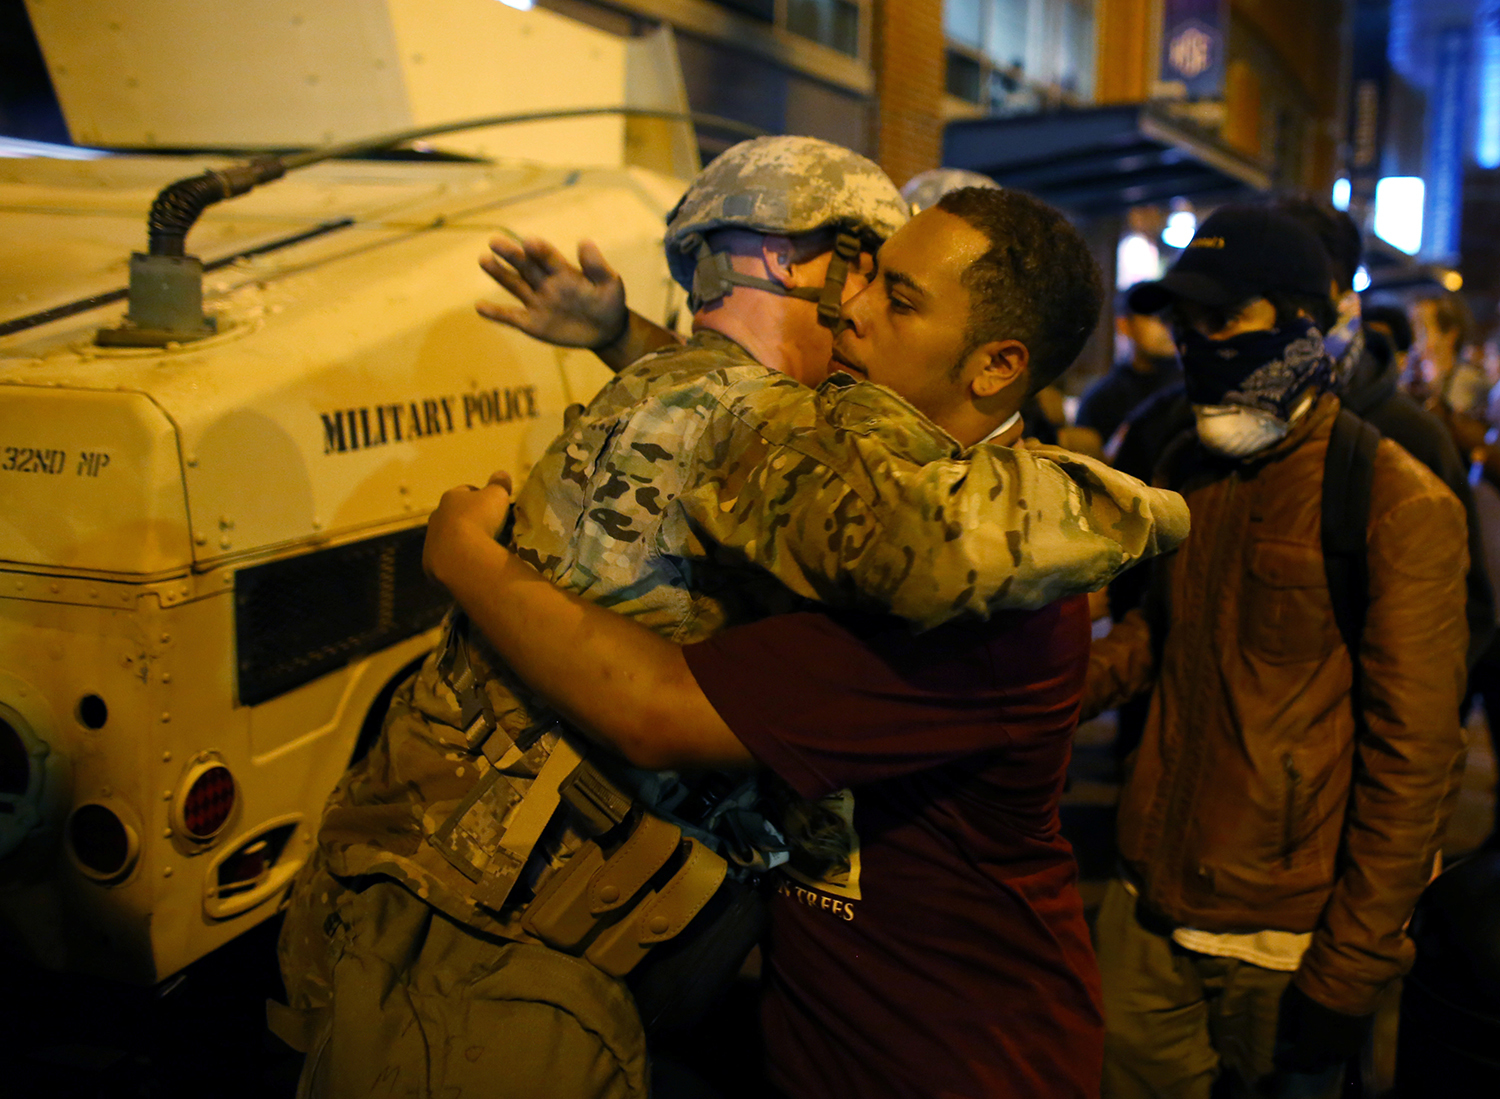 CHARLOTTE 2016-09-23 A U.S. National guard soldier accepts a hug from protester as people march through downtown to protest the police shooting of Keith Scott in Charlotte, North Carolina, U.S., September 22, 2016.     REUTERS/Mike Blake     TPX IMAGES OF THE DAY Photo:  / REUTERS / TT / kod 72000